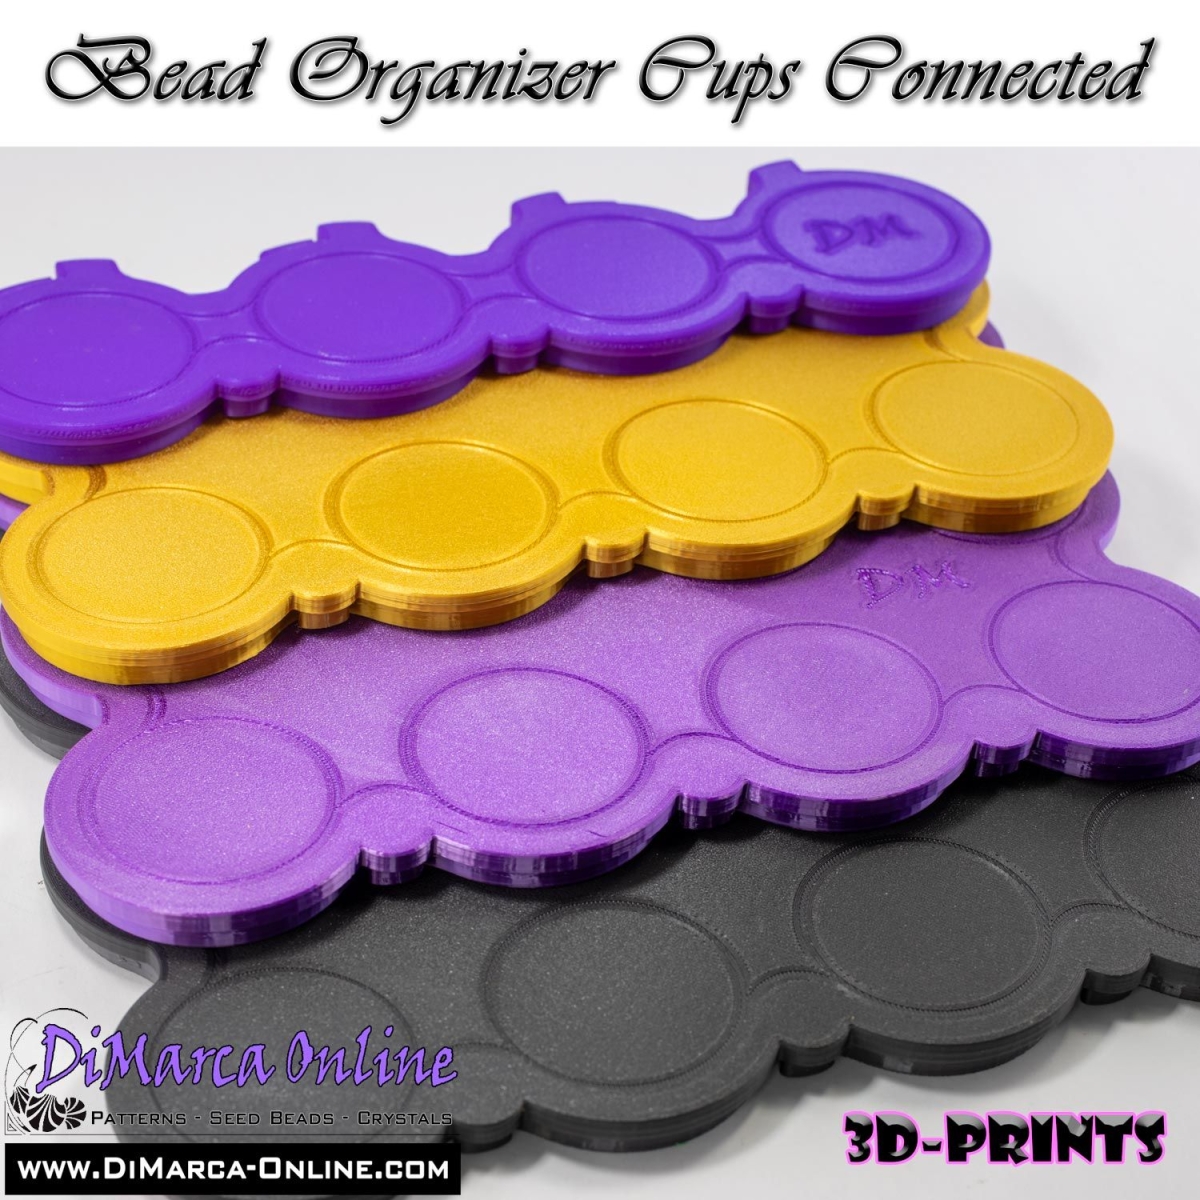 Bead Organizer Cups Connected - 04 Cups - Alphabet, Numbers or Blanks with  Lid - DiMarca Online